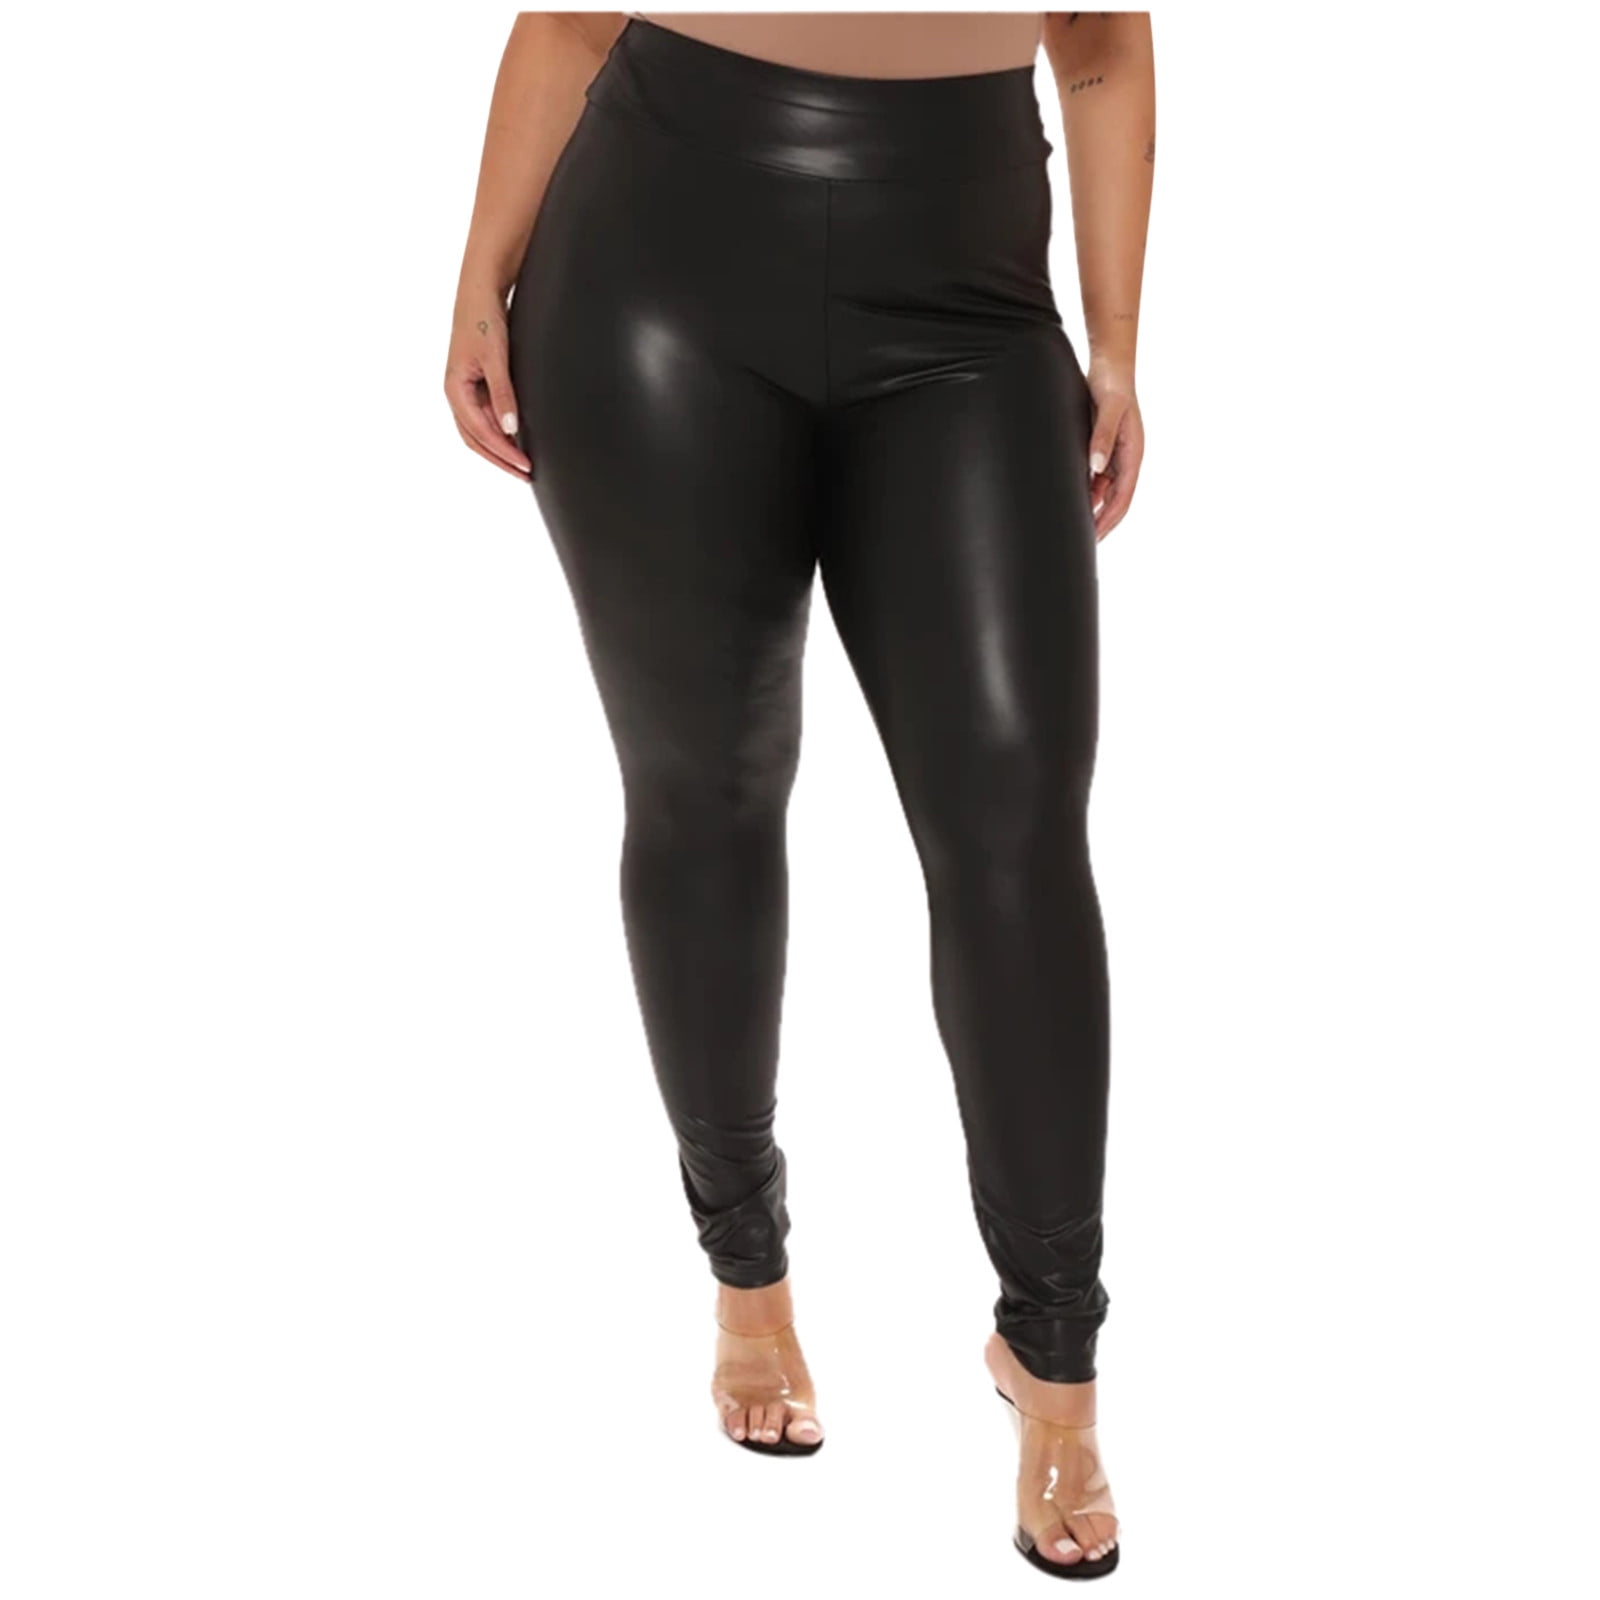 TAIAOJING High Waisted Leggings for Women Large Size ed Slim Black Leather  Casual Stretch Trousers Leather Seamless Leggings Yoga Pants 